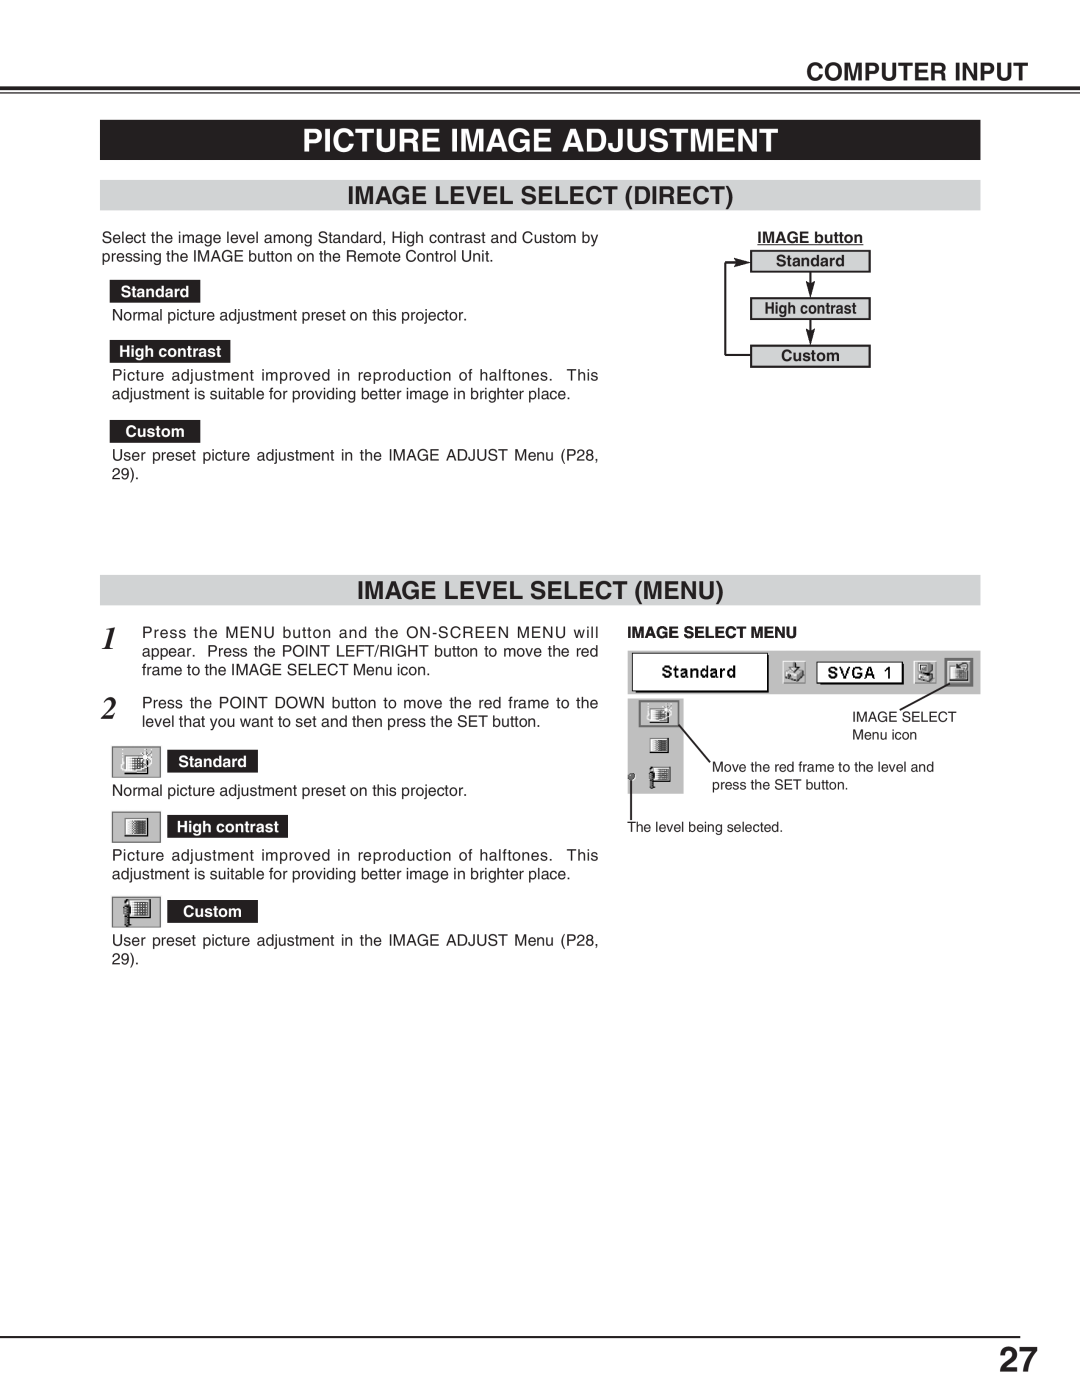 Canon LV-X2 owner manual Picture Image Adjustment, Image Level Select Direct, Image Level Select Menu, Computer Input 